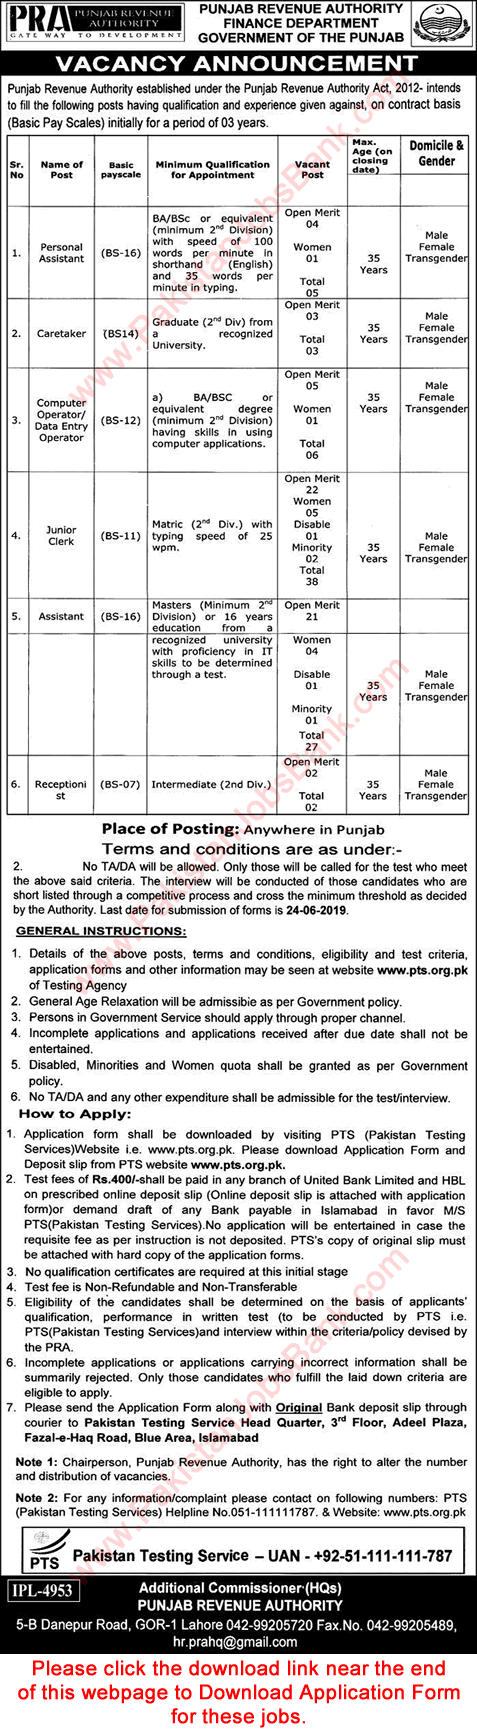 Punjab Revenue Authority Jobs 2019 May / June PTS Application Form Clerks, Assistants & Others Latest